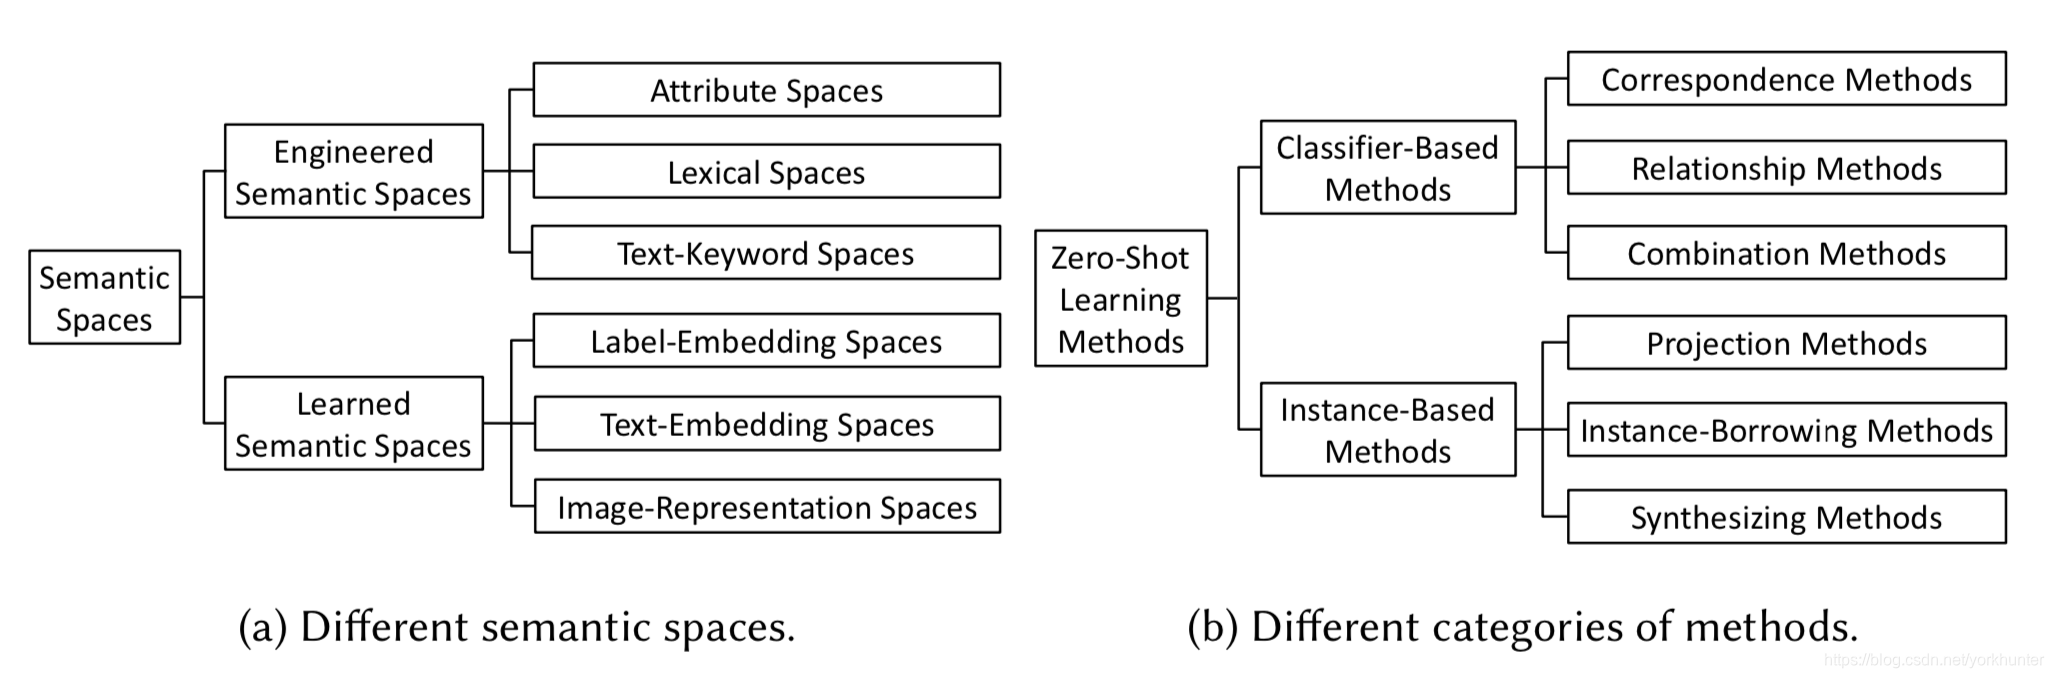 Different semantic spaces and methods in zero-shot learning